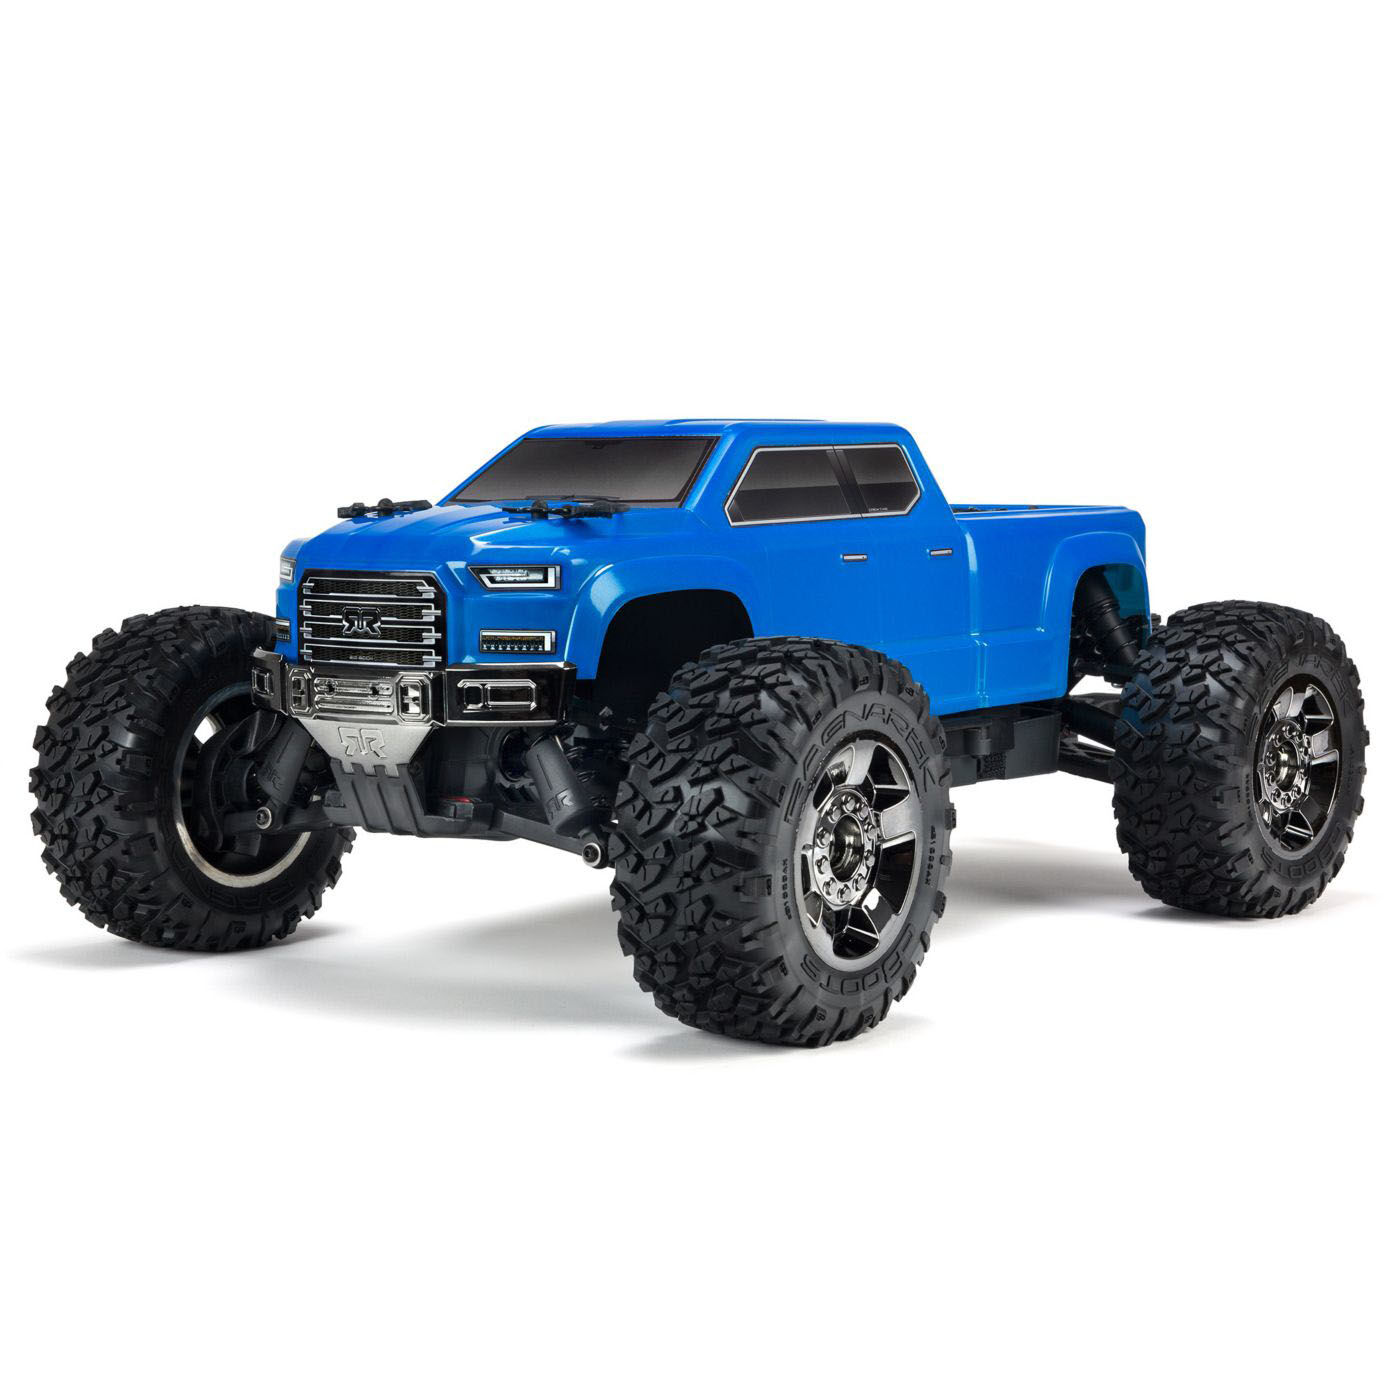 ARRMA 1/10 Painted and Trimmed Body with Decals Blue Big Rock Crew CAB 4X4 ARA402283 